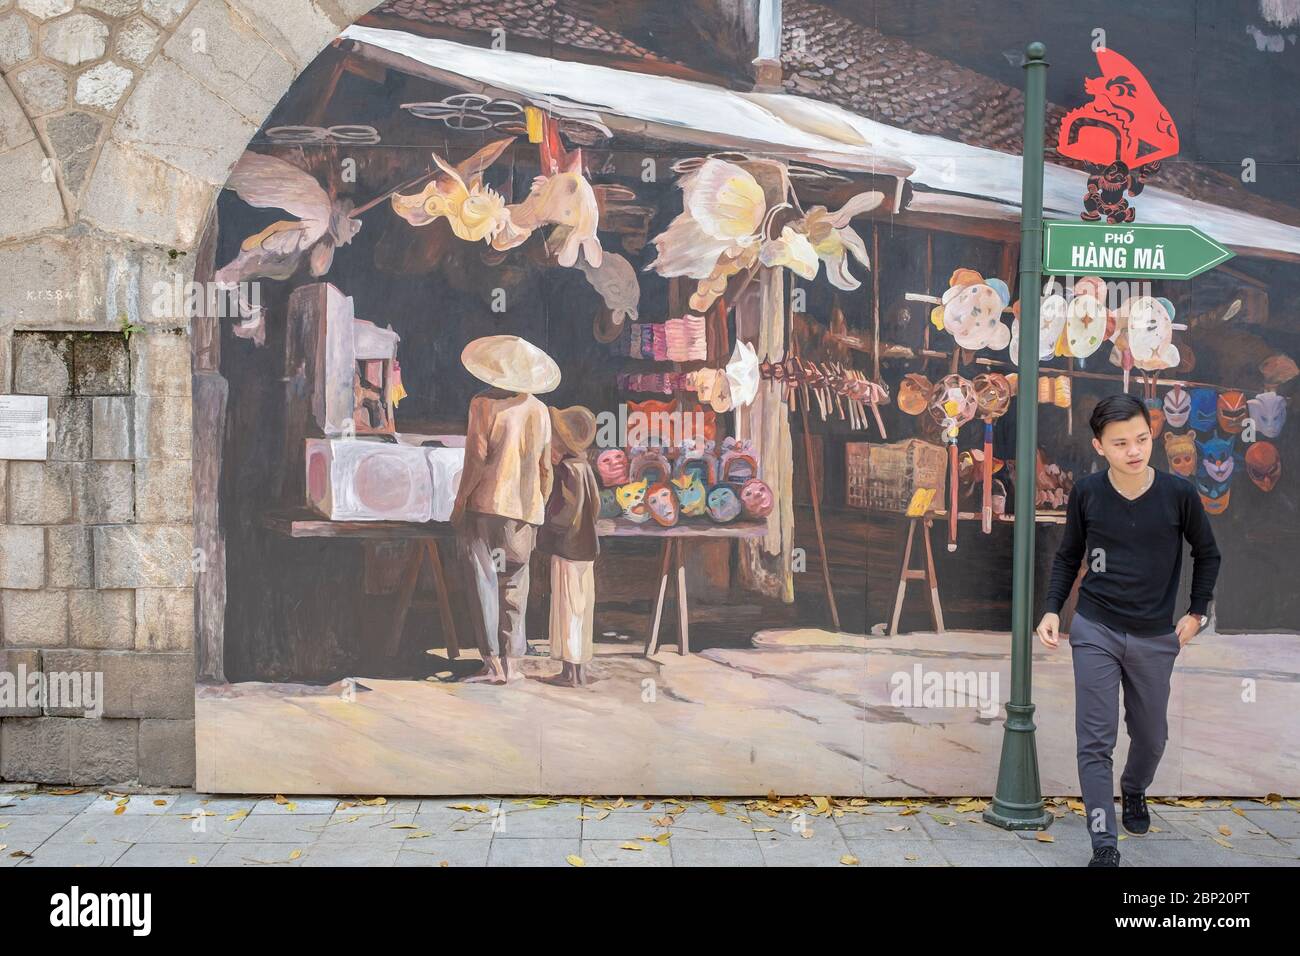 Hanoi, Vietnam - May 1, 2018: Young man walking away from a mural, seeming to walk out from the mural Stock Photo